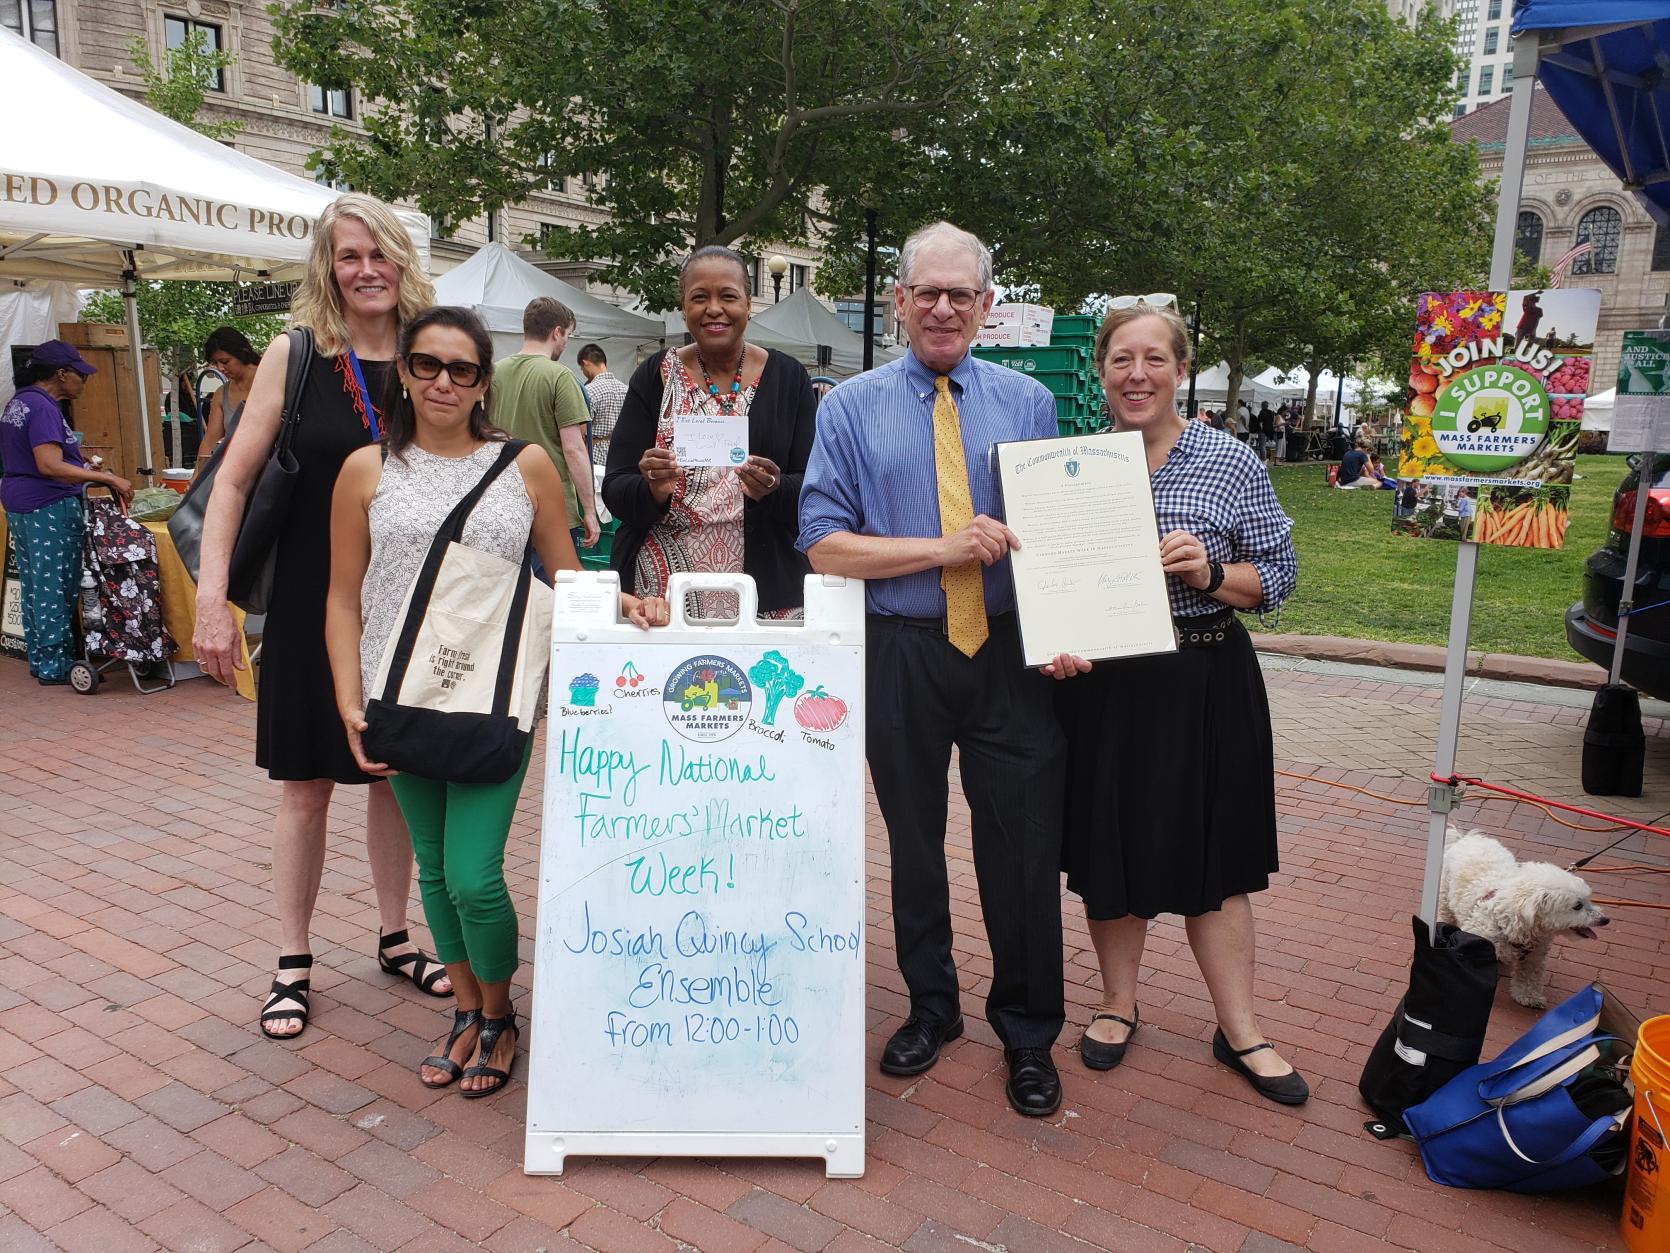 State agricultural officials visit Copley Farmers Market for Farmers Market Week. 